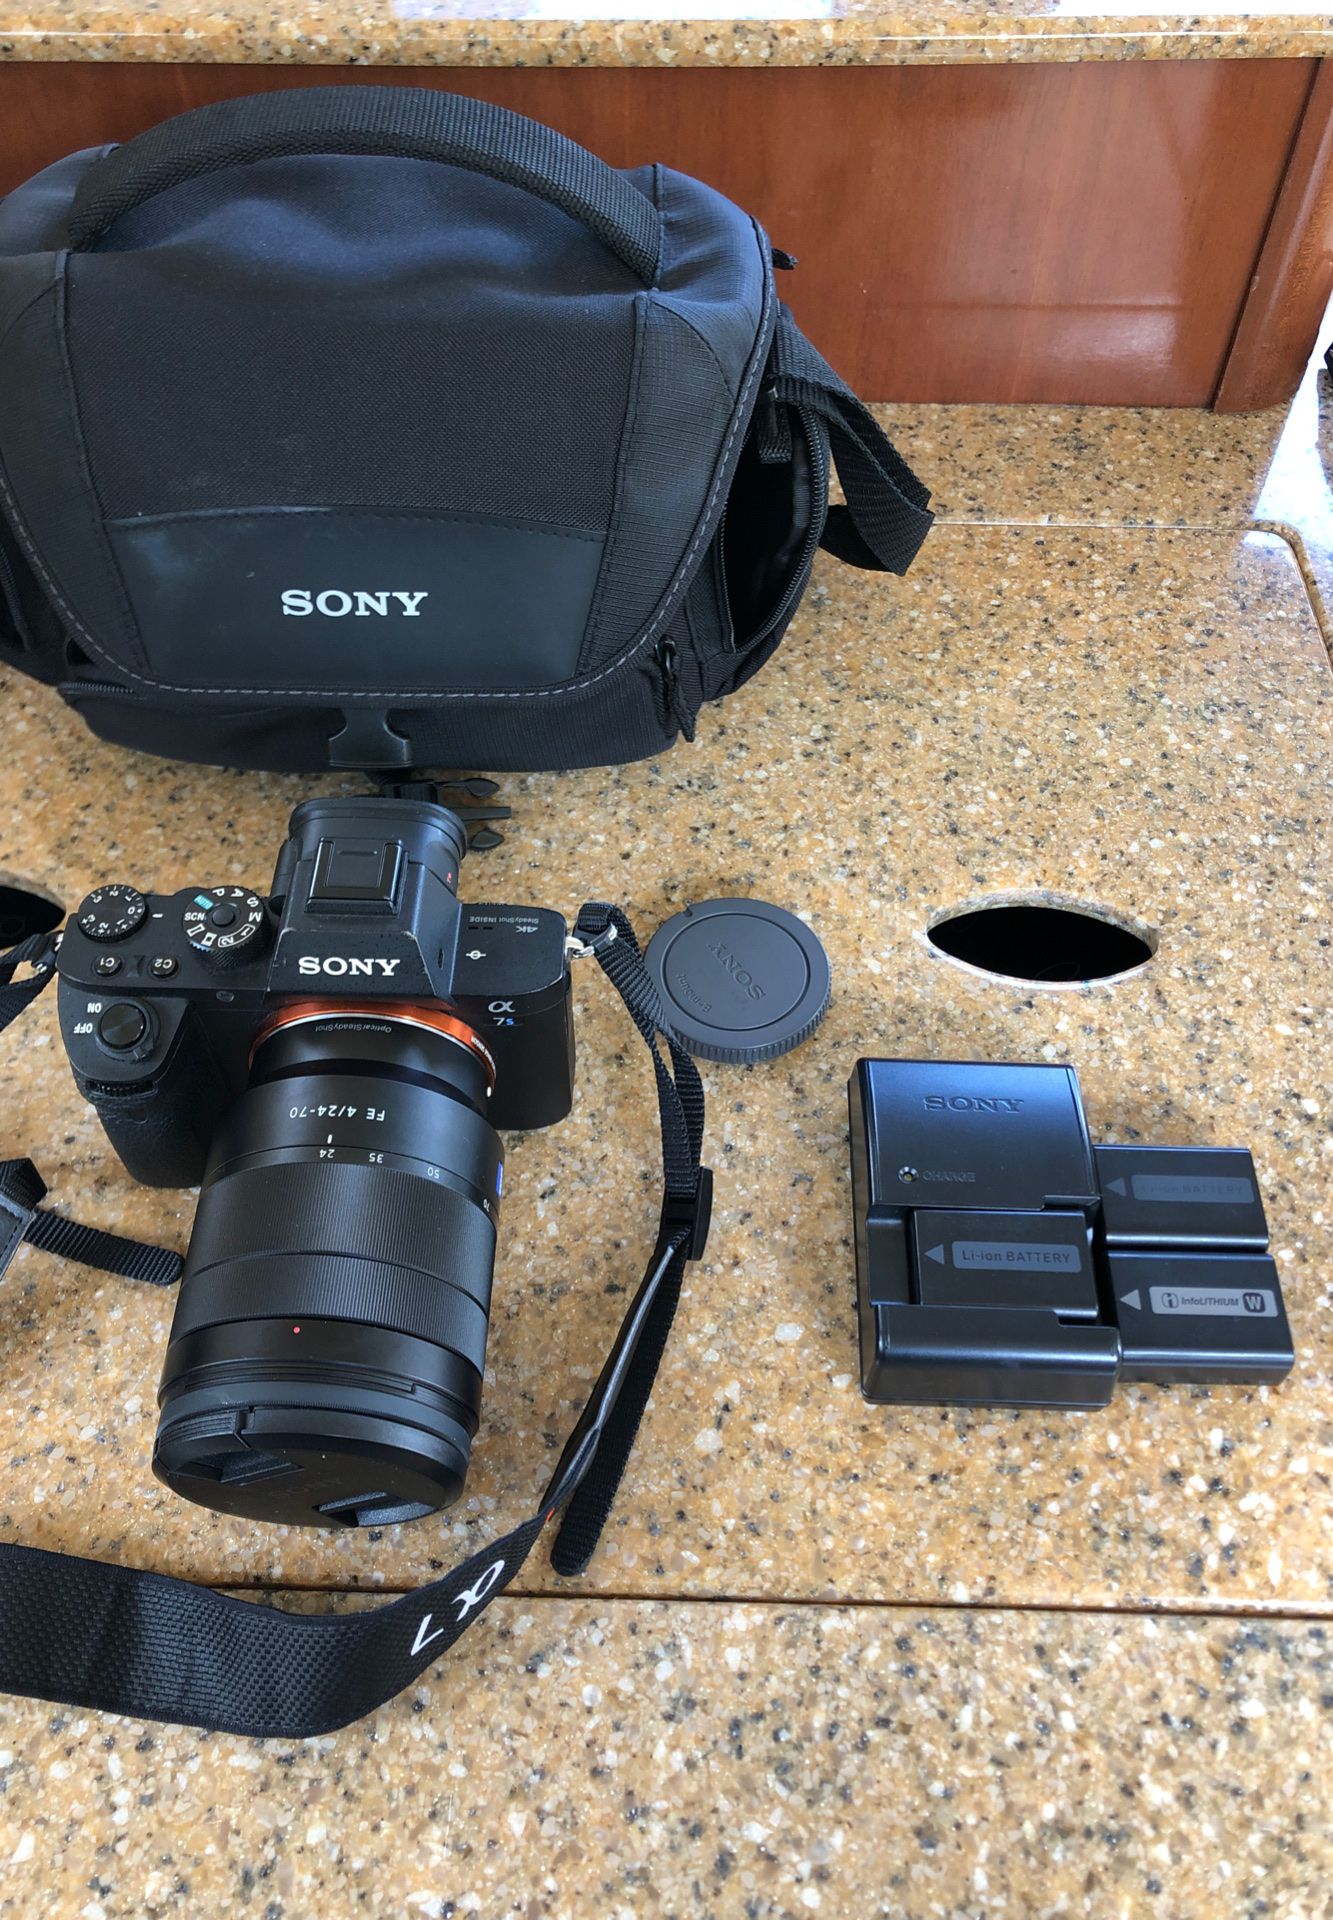 Sony a7Sii with 3 batteries, bag